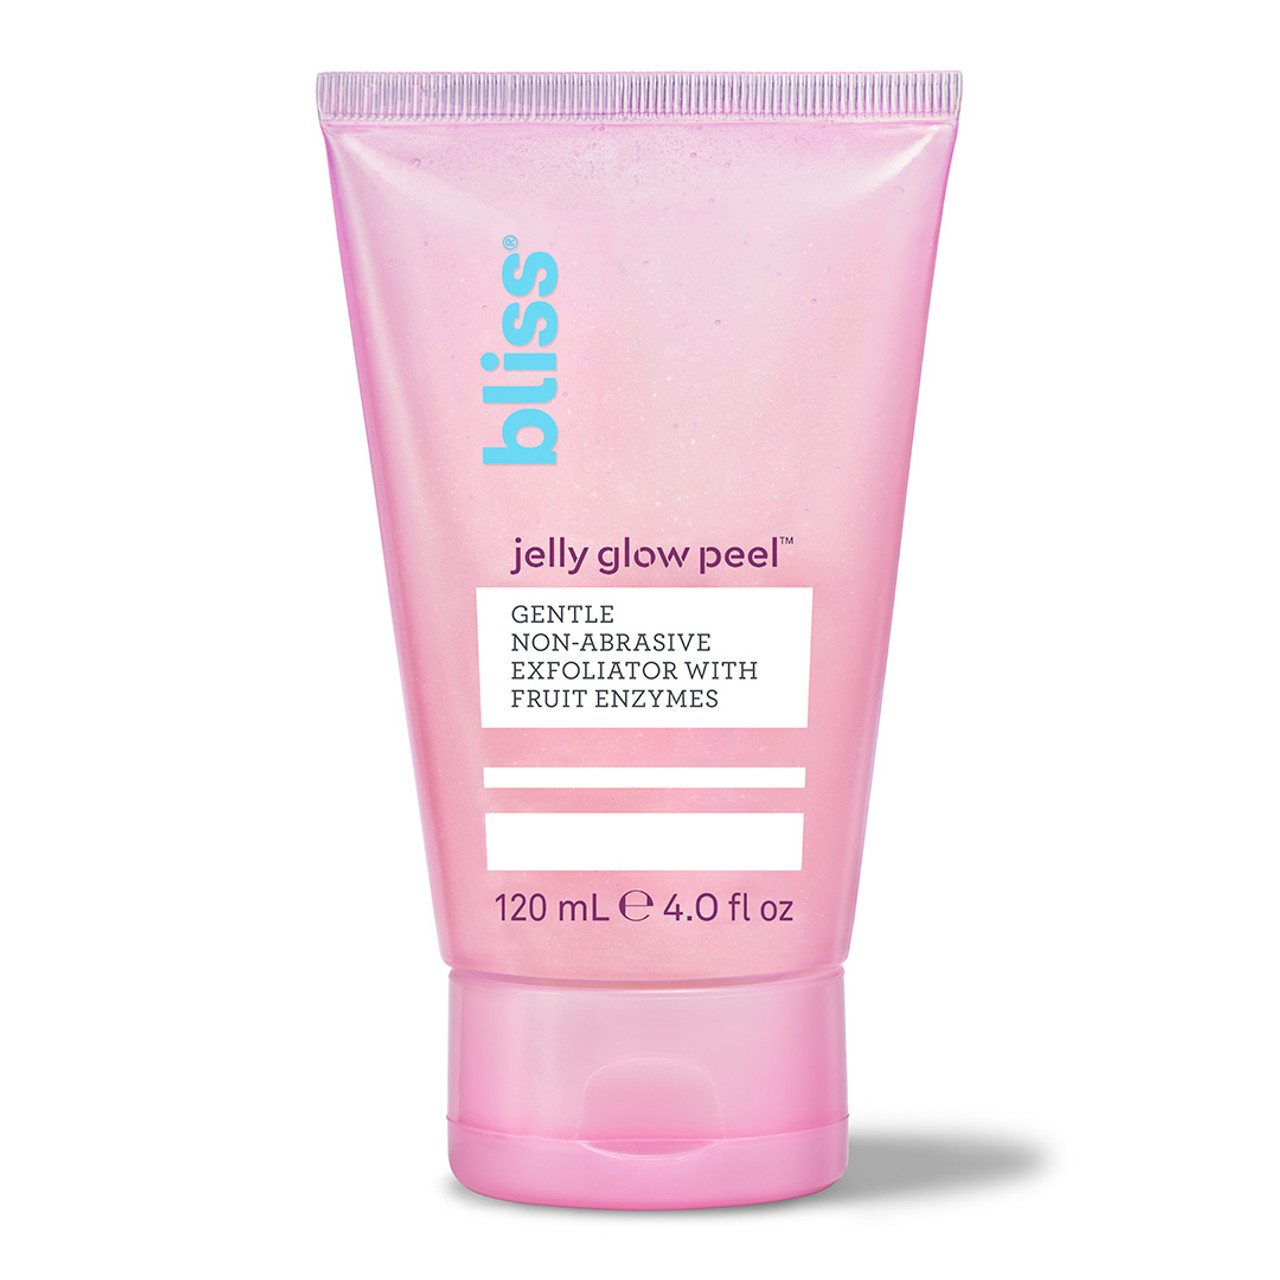 Bliss Jelly Glow Peel? Gentle Non-Abrasive Exfoliator With Fruit Enzymes